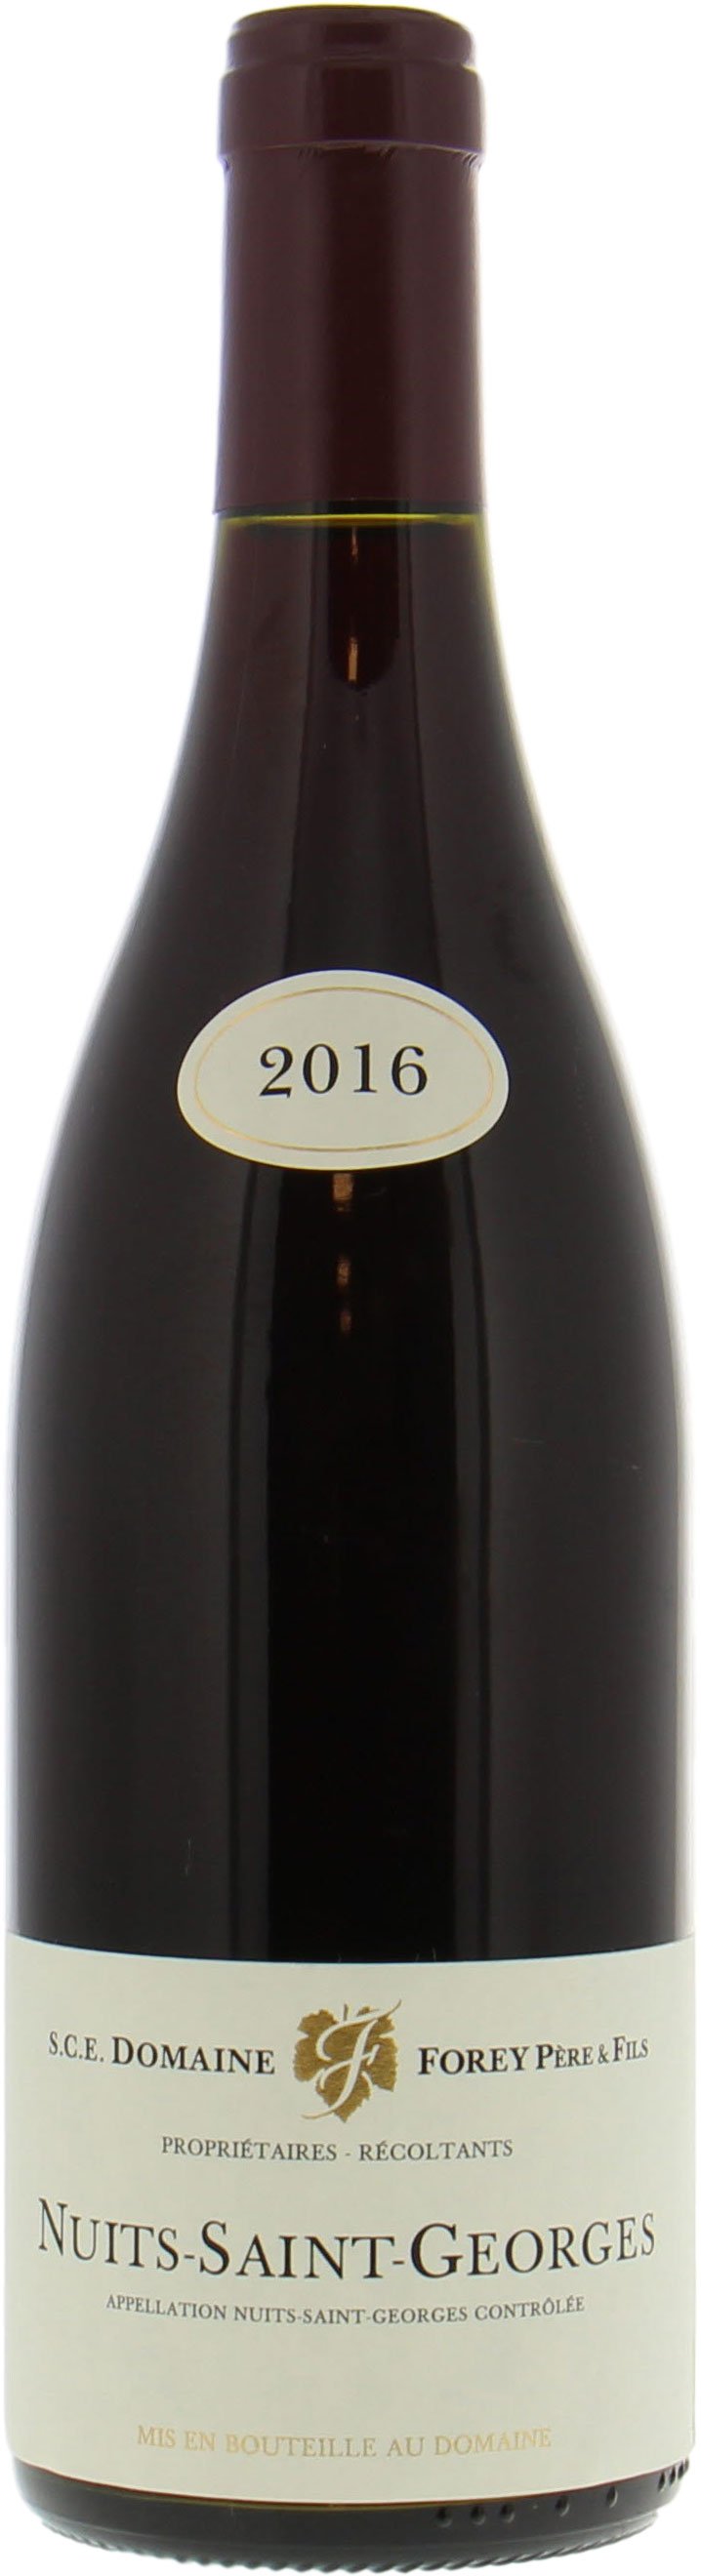 Domaine Forey Pere & Fils - Nuits St. Georges 2016